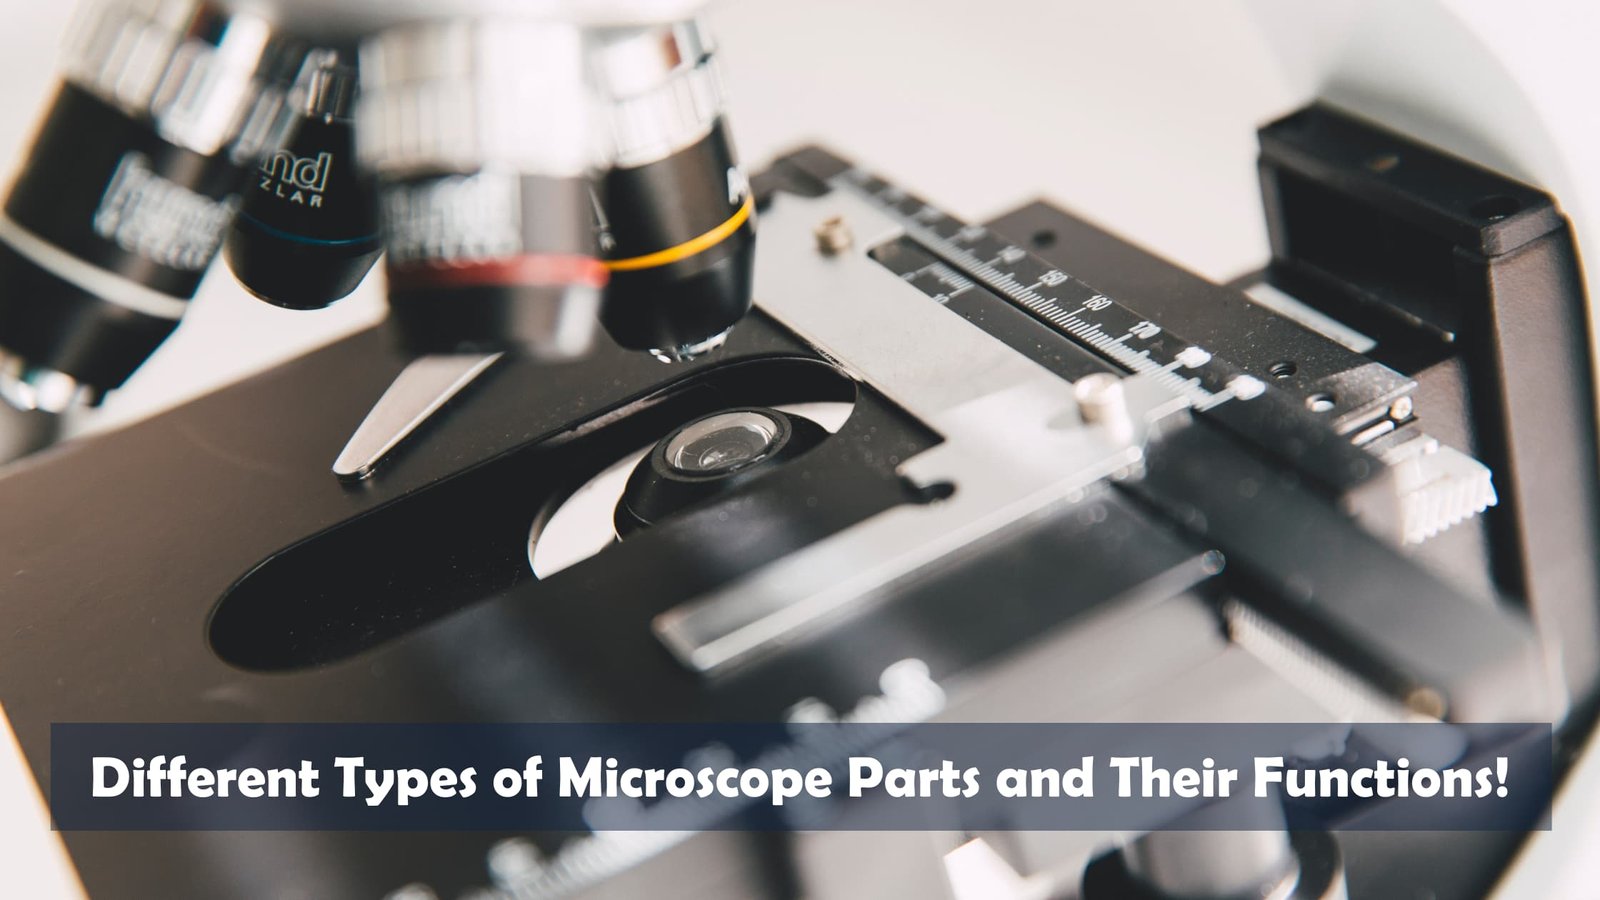 Different Types of Microscope Parts and Their Functions!